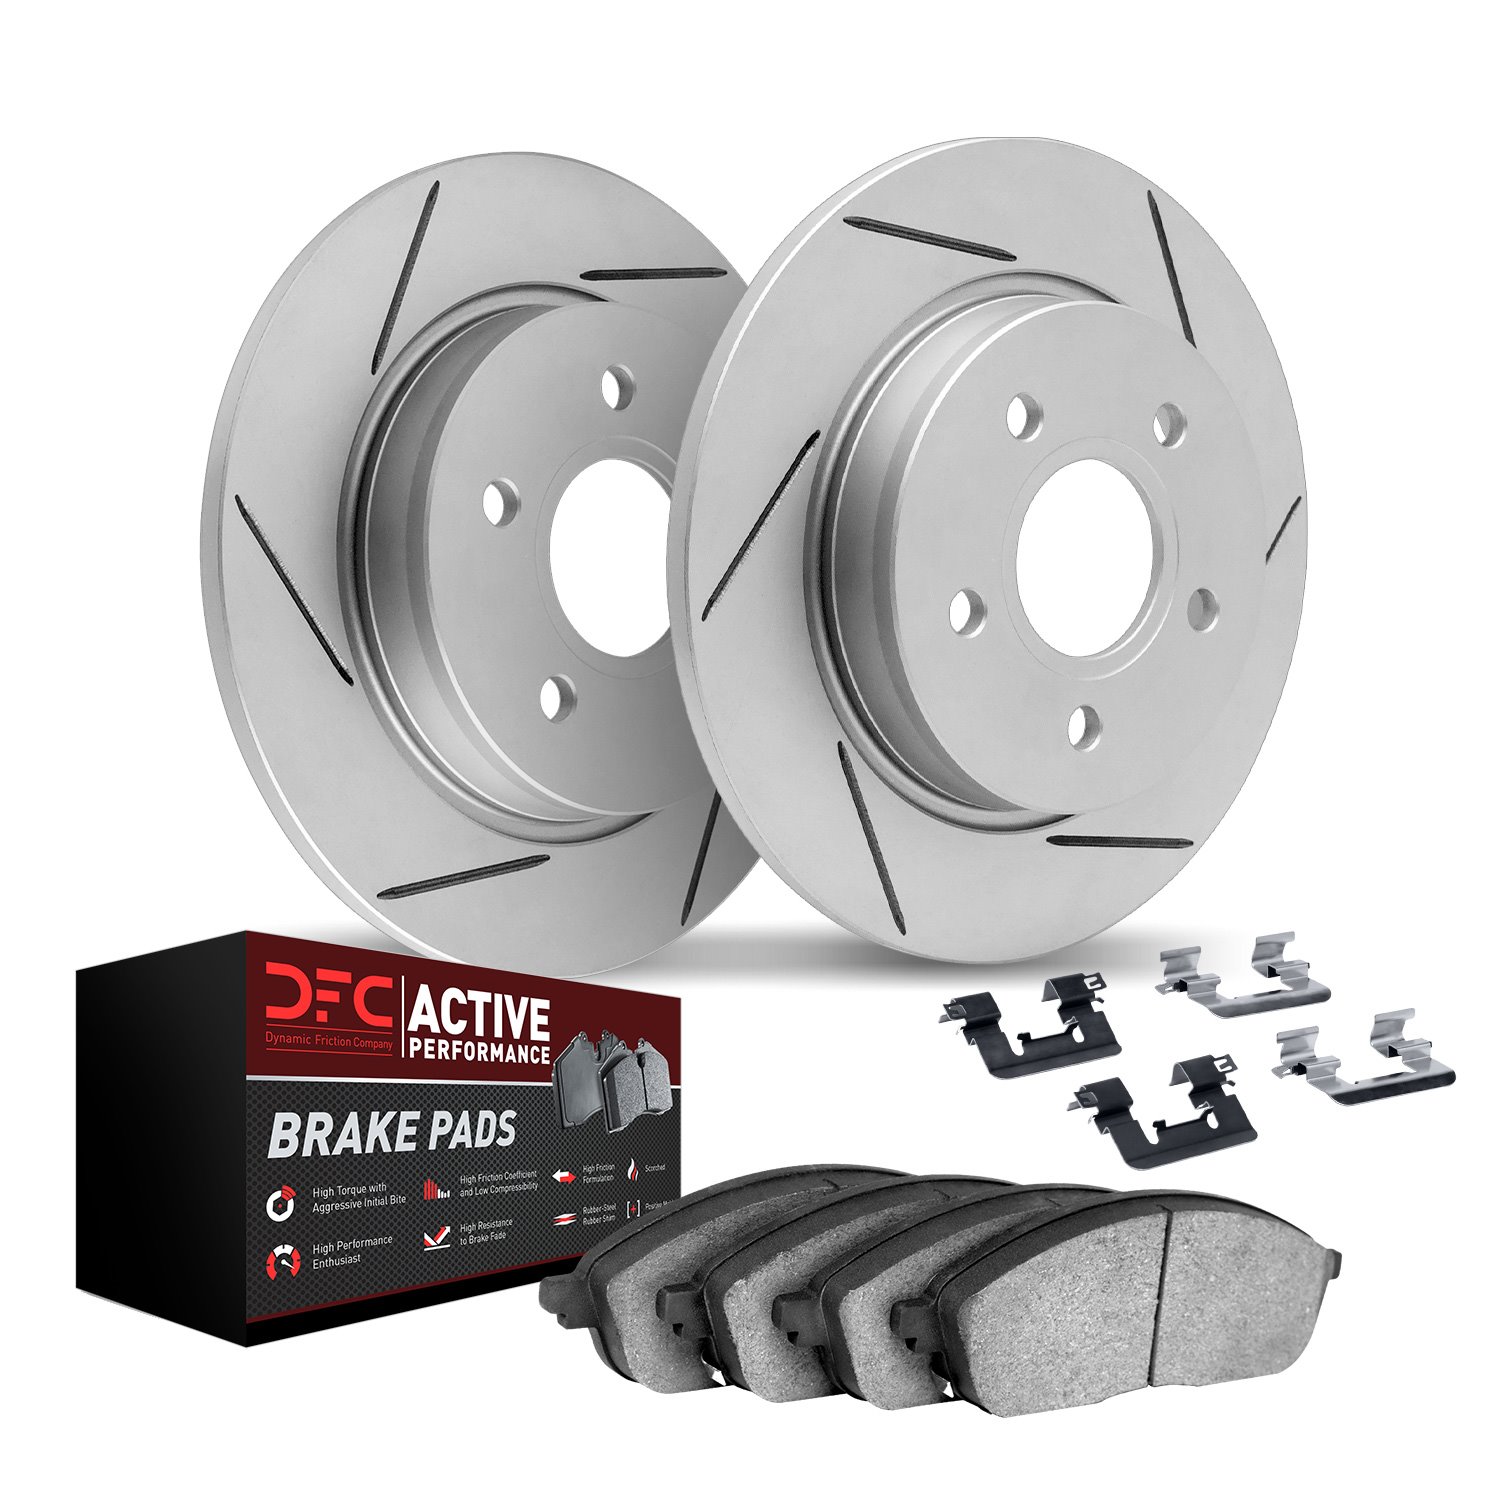 2712-59117 Geoperformance Slotted Brake Rotors with Active Performance Pads Kits & Hardware, 2007-2012 Acura/Honda, Position: Re